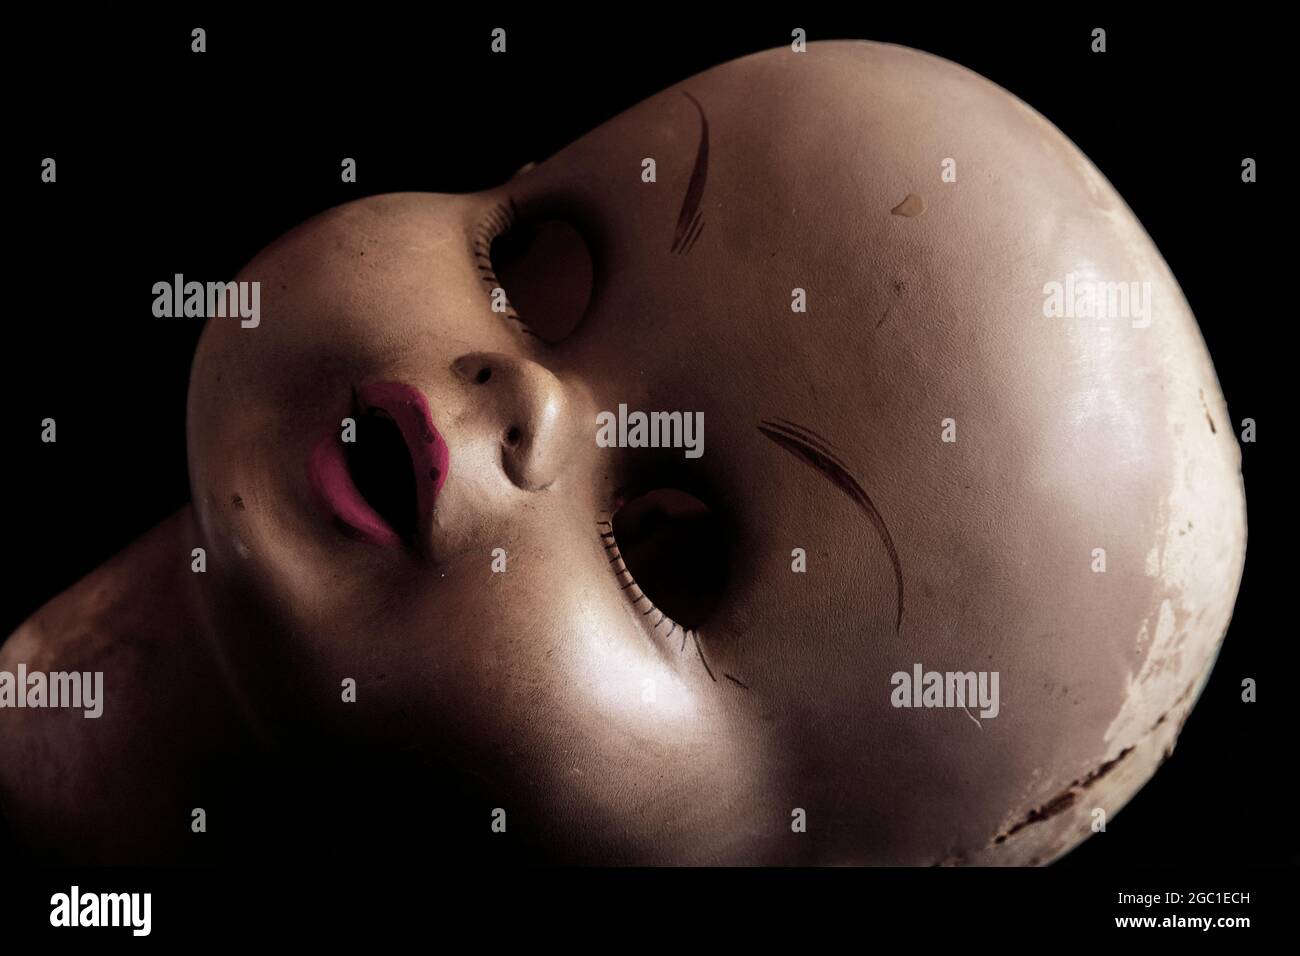 Disturbing image of an old doll's head Stock Photo